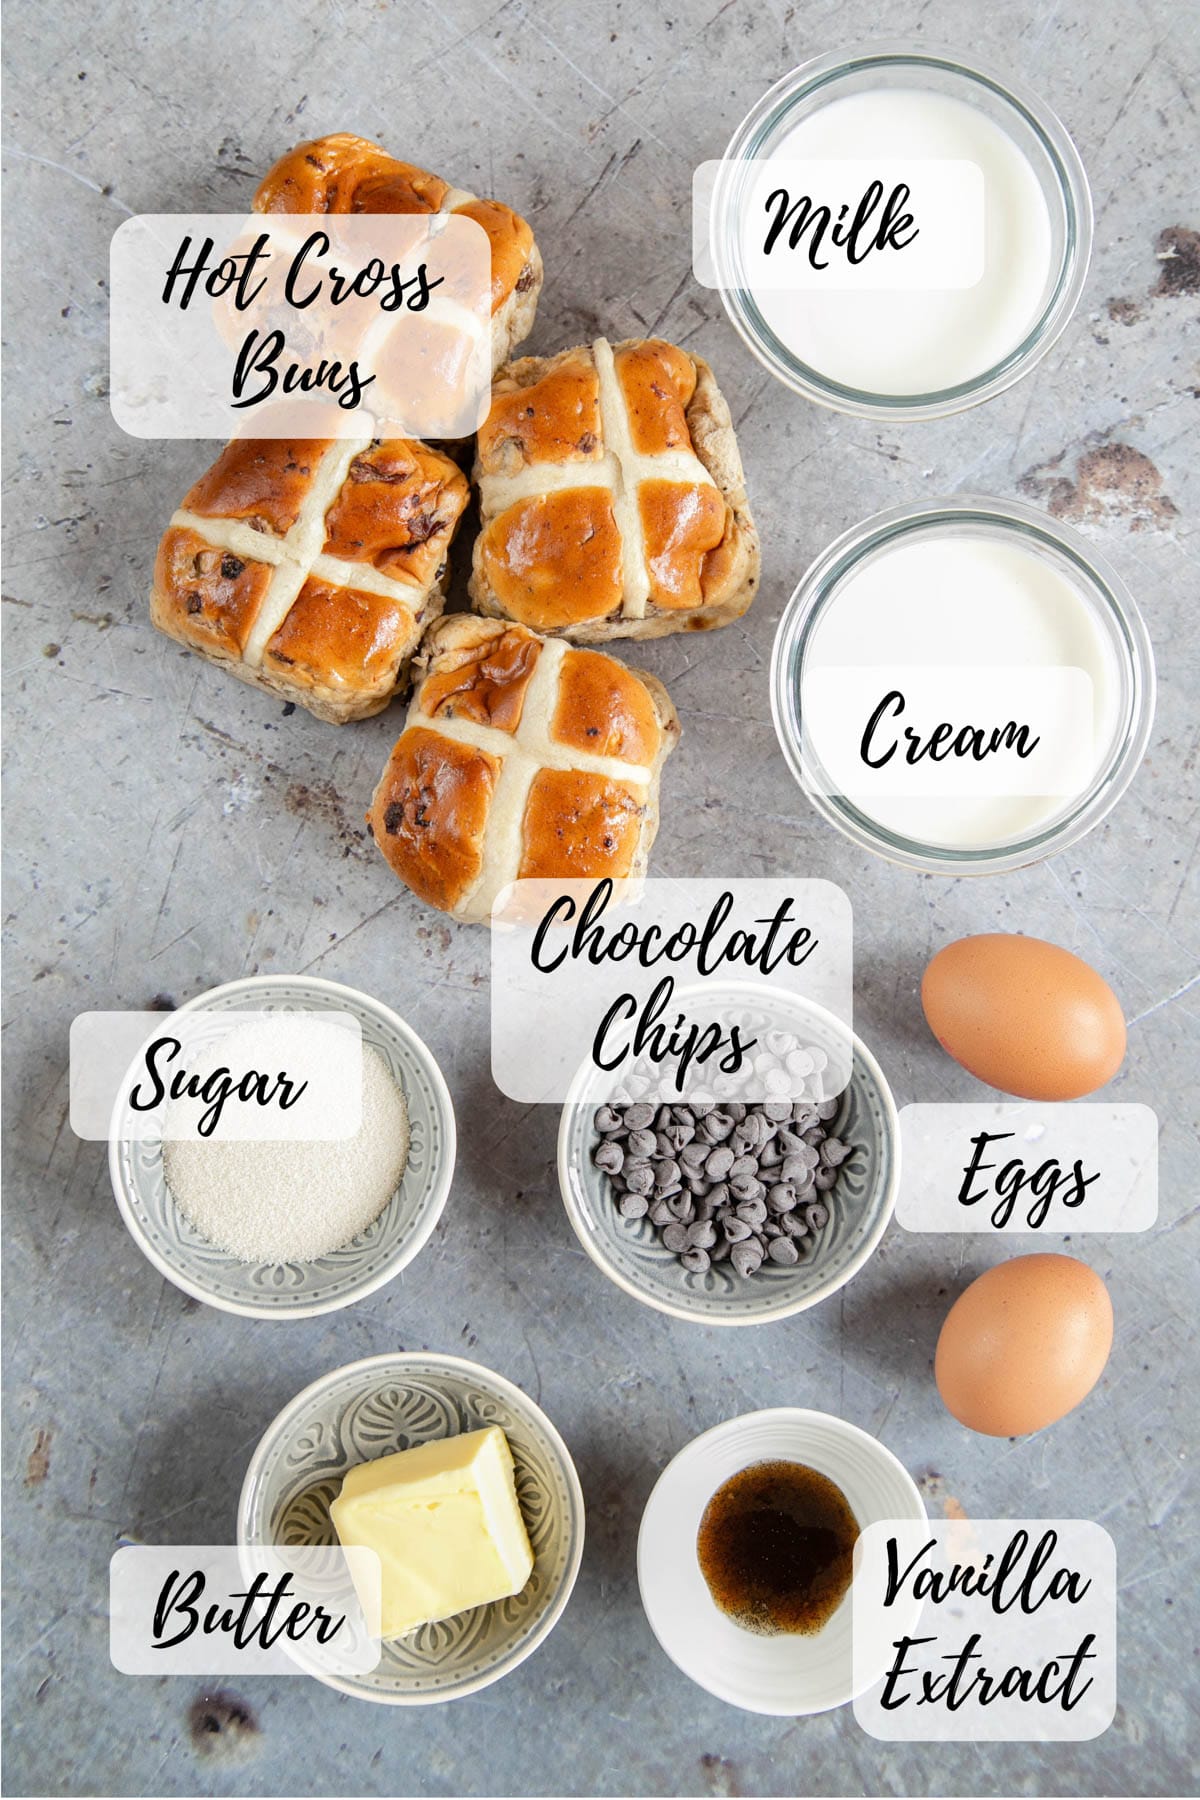 The ingredients assembled, ready to cook: hot cross buns, milk, cream, eggs, vanilla extract, butter, sugar and chocolate chips